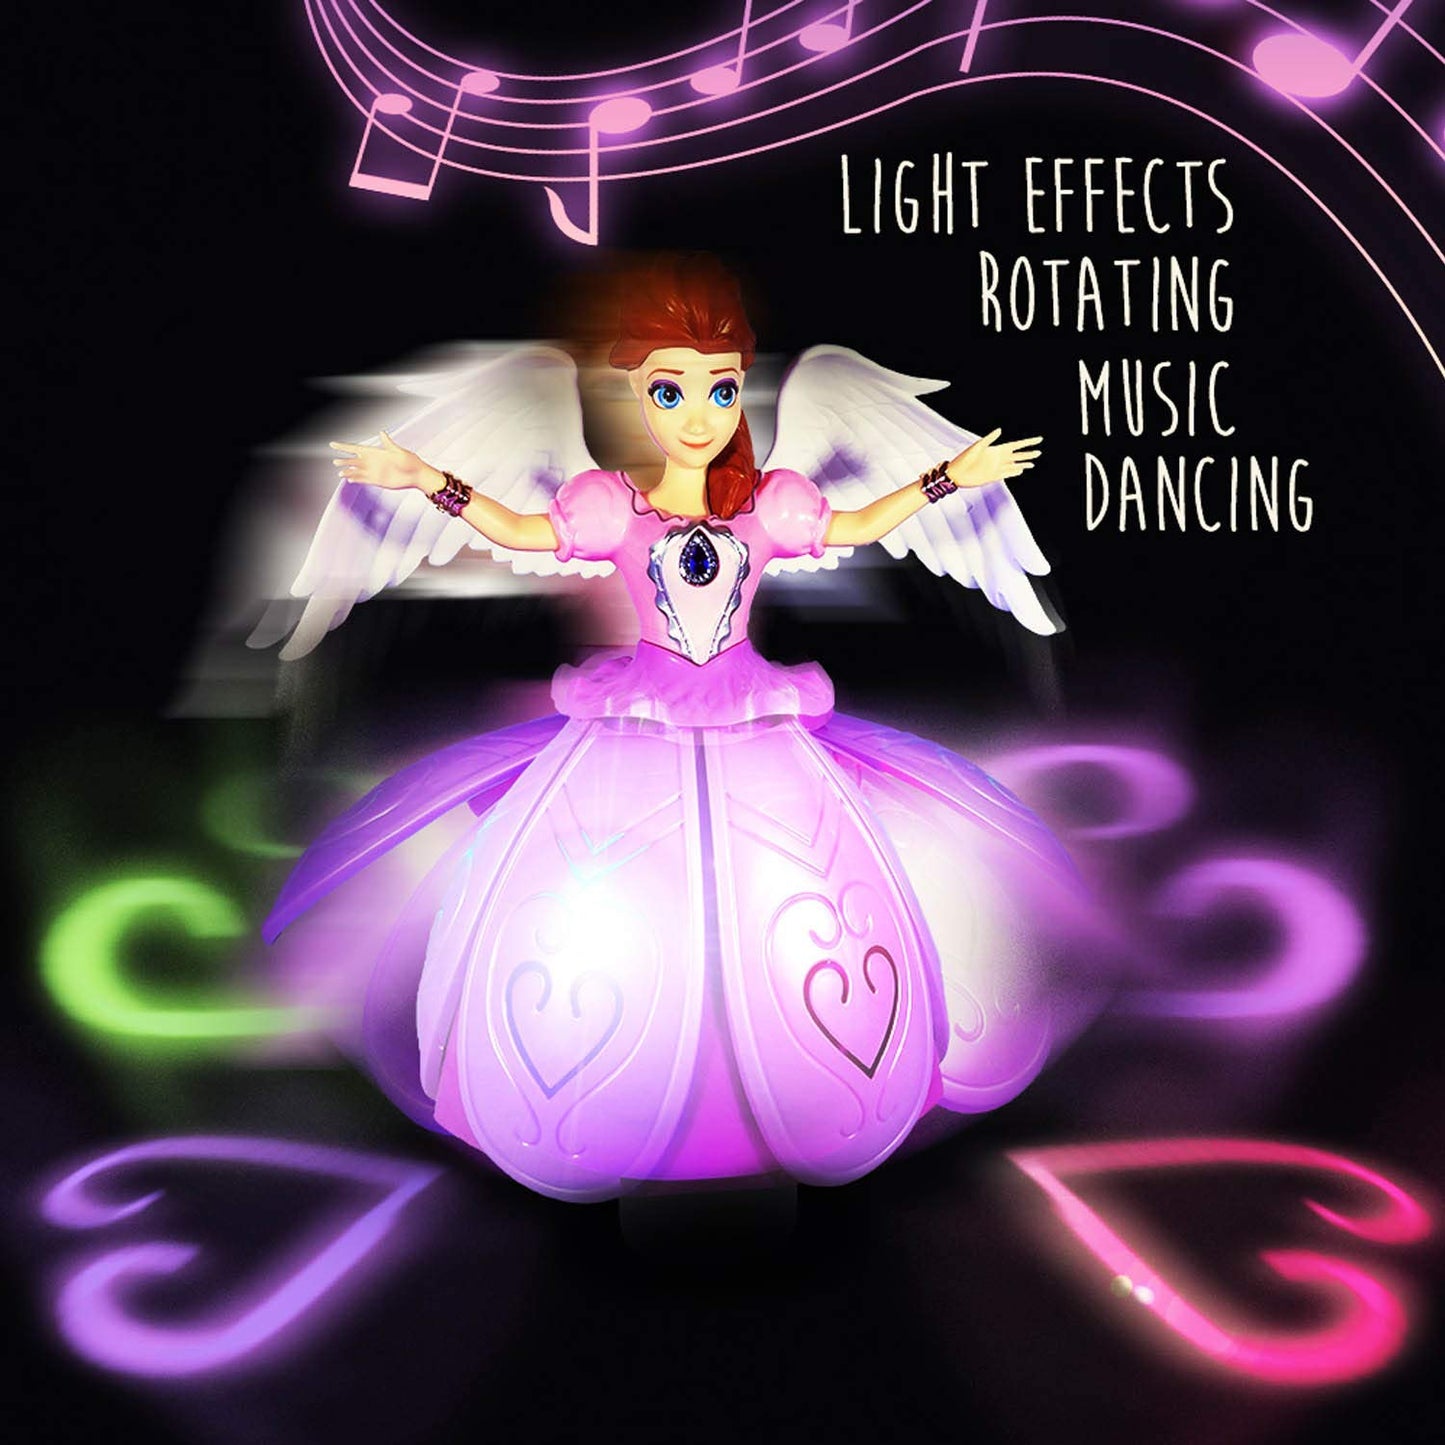 Dancing Fairy Princes Angel Girl Robot with Lights and Music